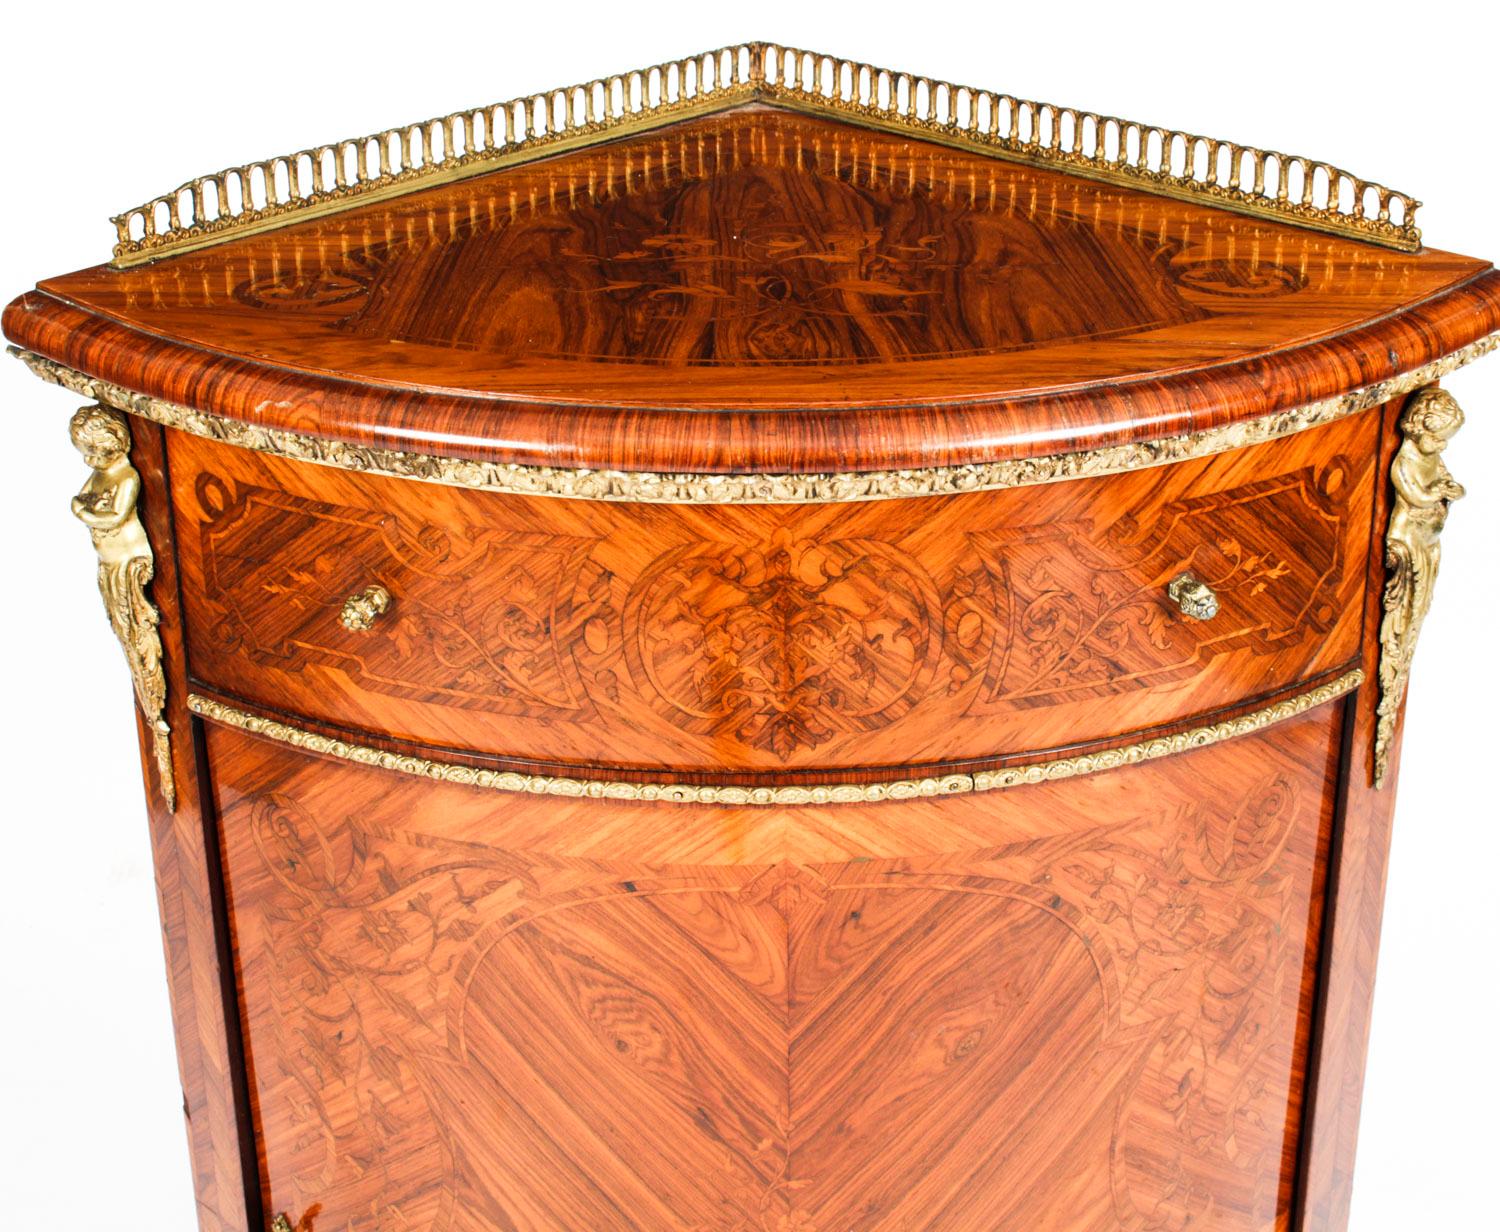 This is a fabulous antique French ormolu mounted kingwood and walnut marquetry low bowfront corner cabinet, circa 1860 in date.

The cabinet is profusely inlaid with a floral marquetry decoration by a master craftsman, it has superb floral